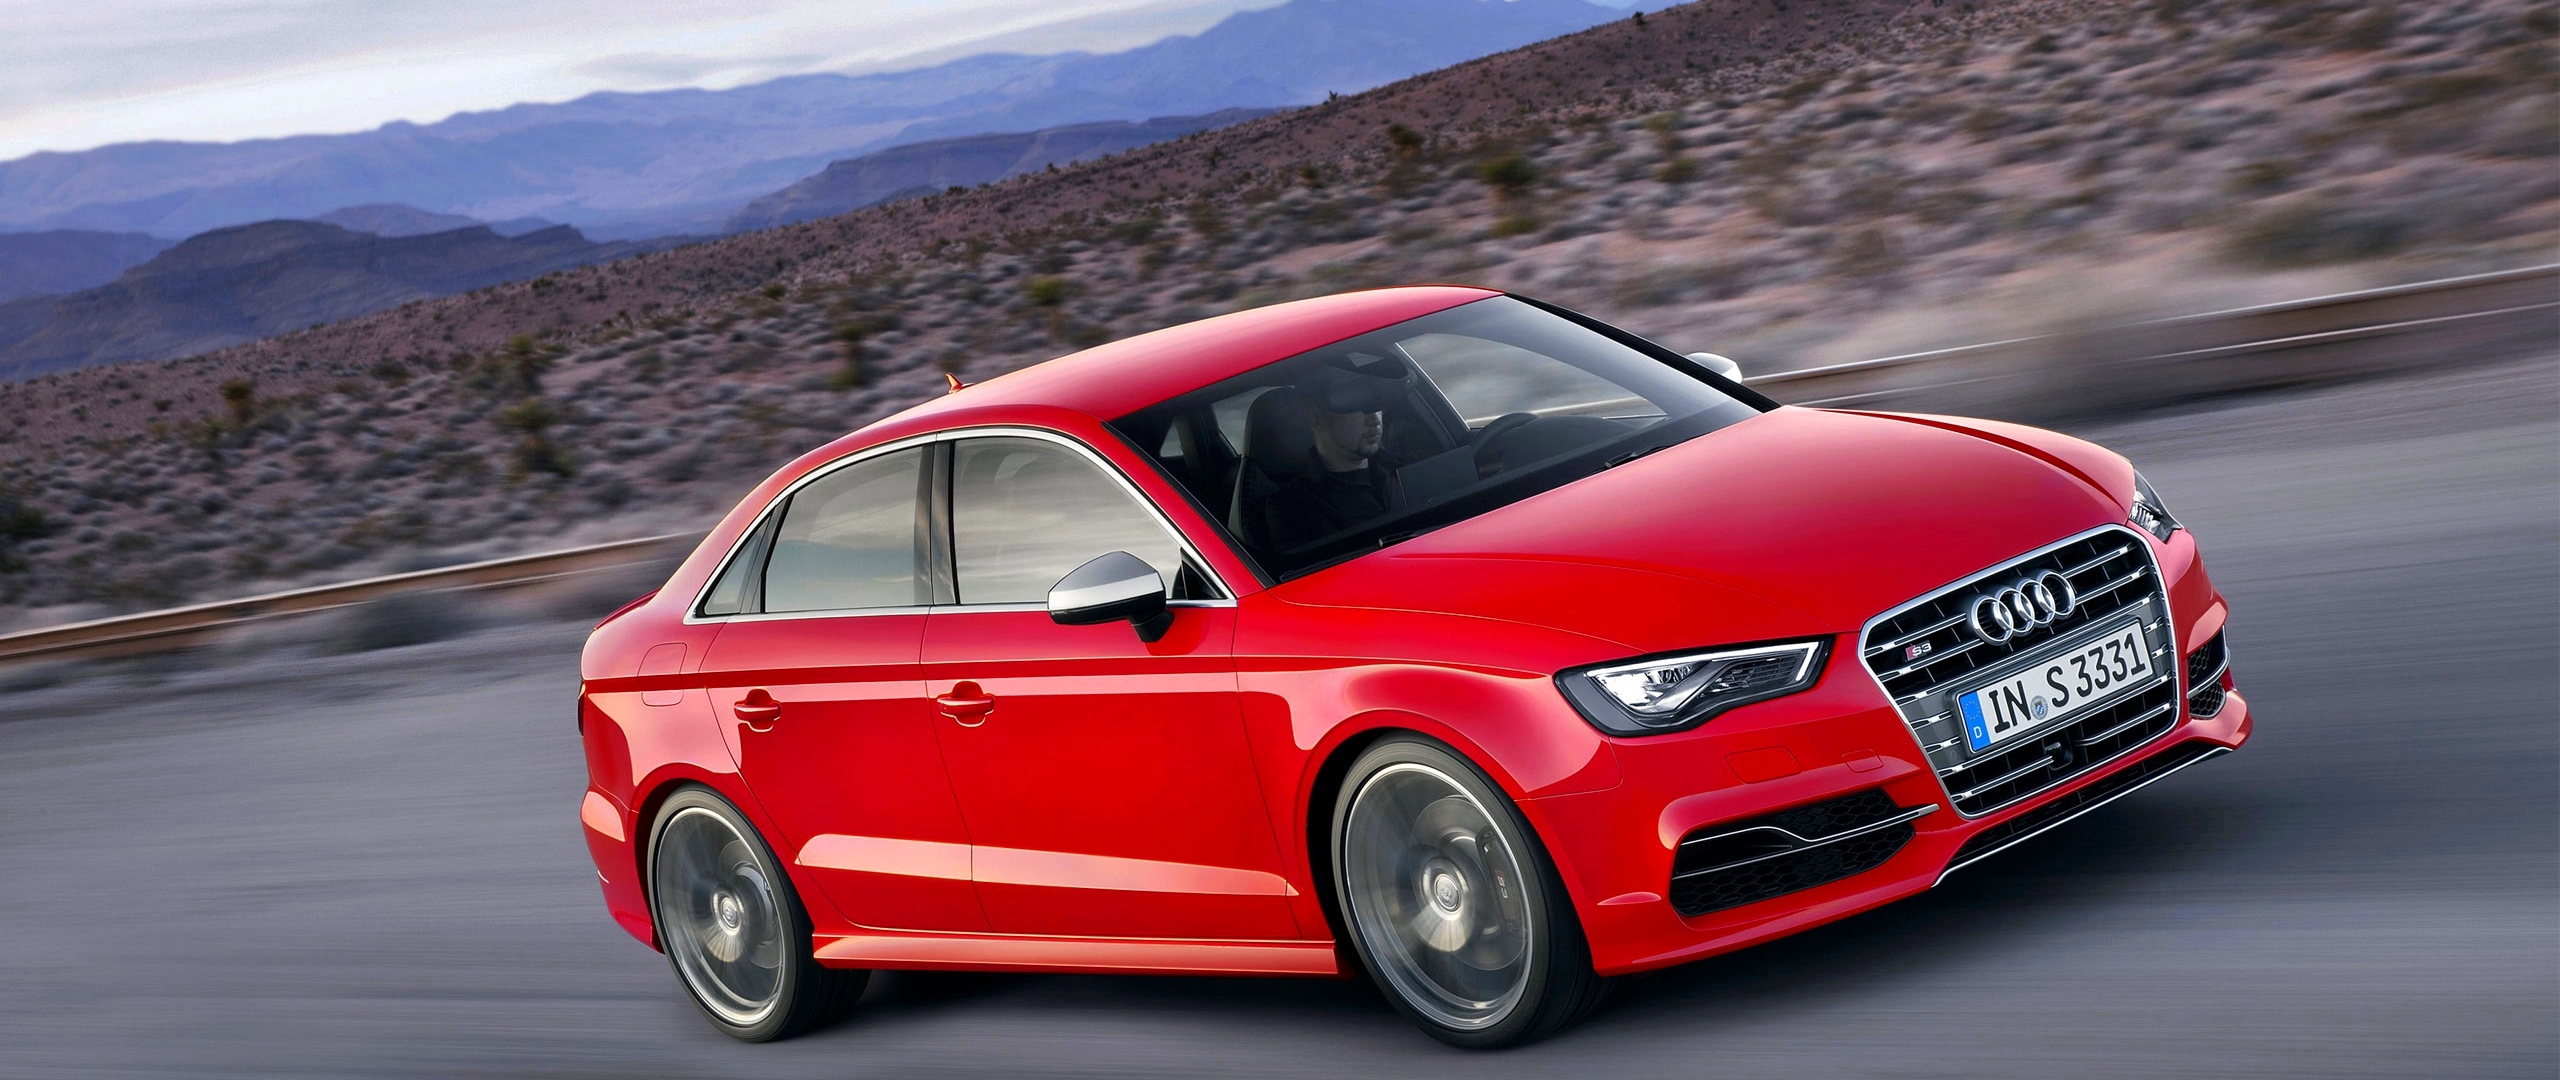 Download wallpaper 2560x1080 audi s3 red side view dual wide 2560x1080